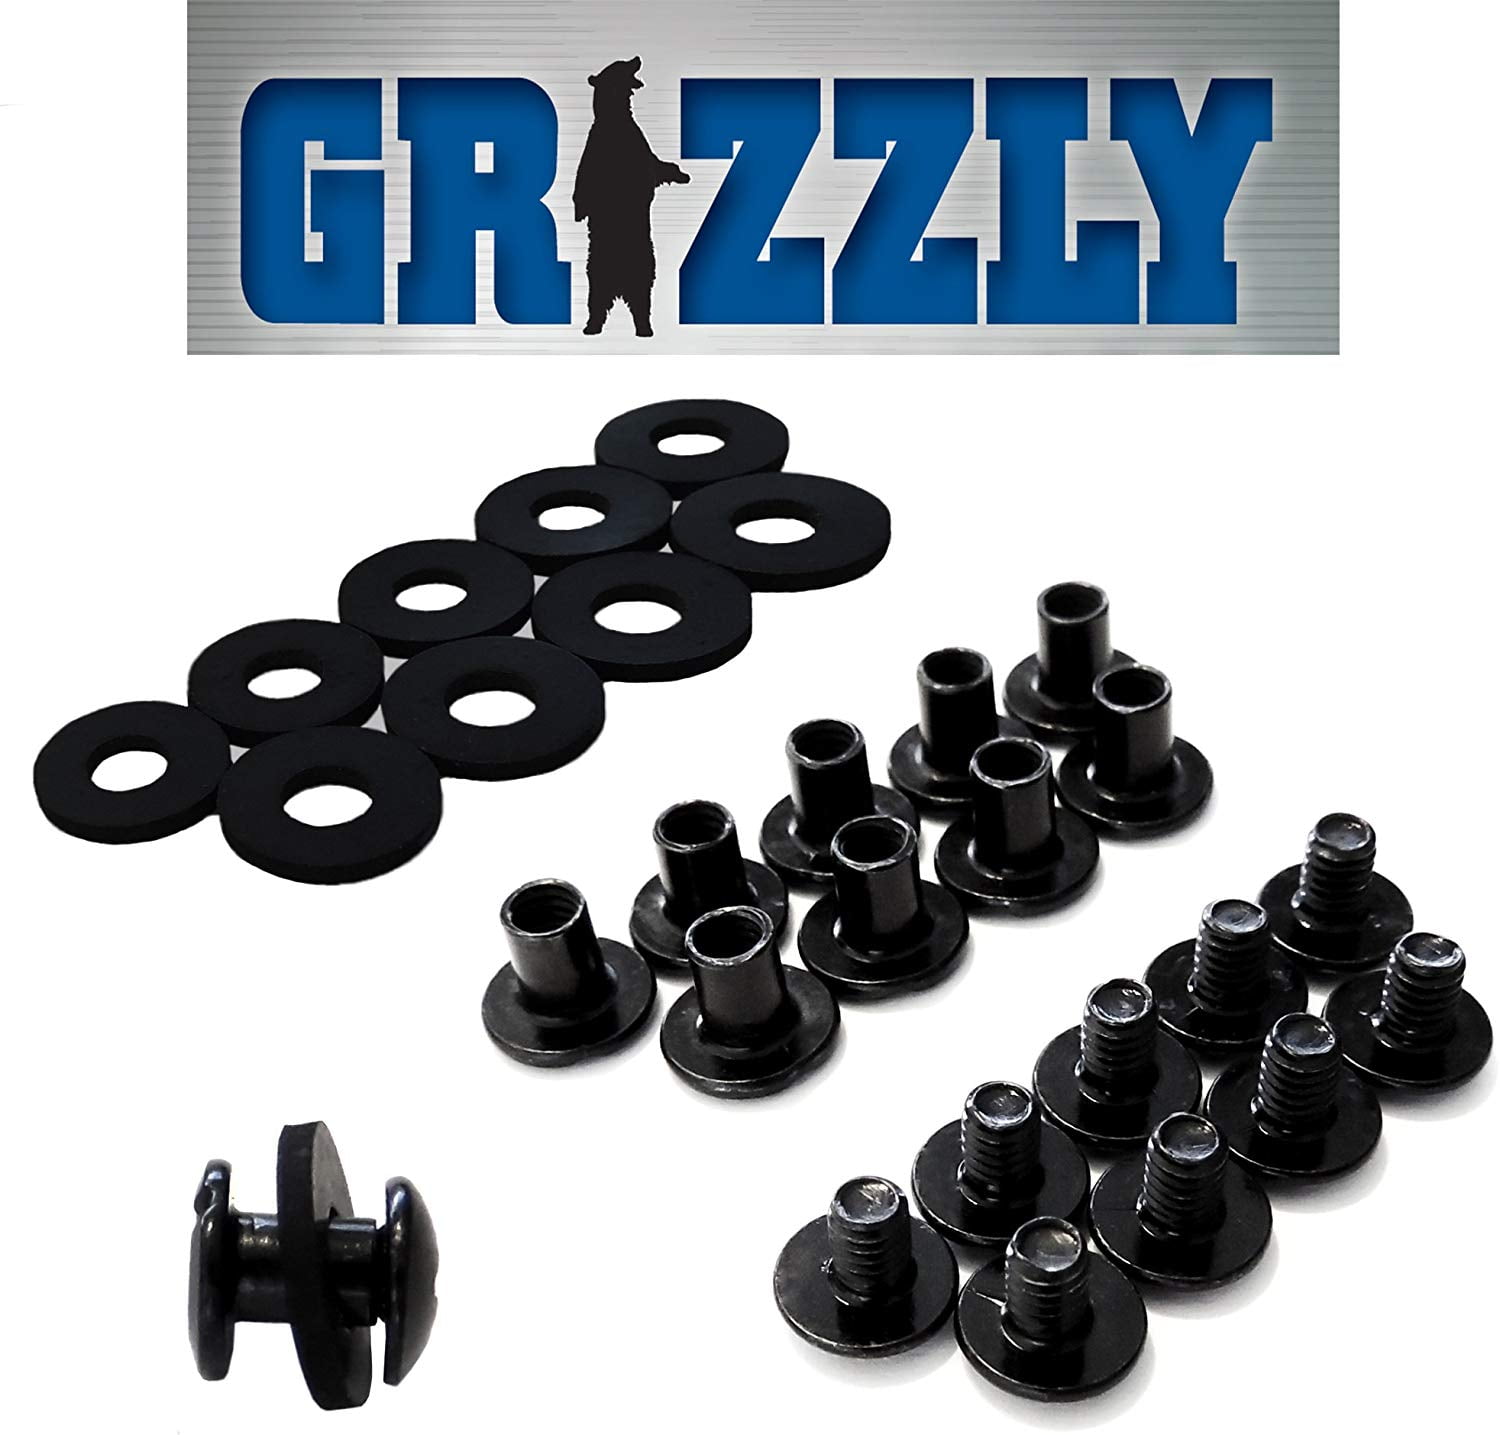 BLACK CHICAGO SCREWS 1/4" for Leather/Kydex Gun Holsters w/ Rubber Washers 50-PK 